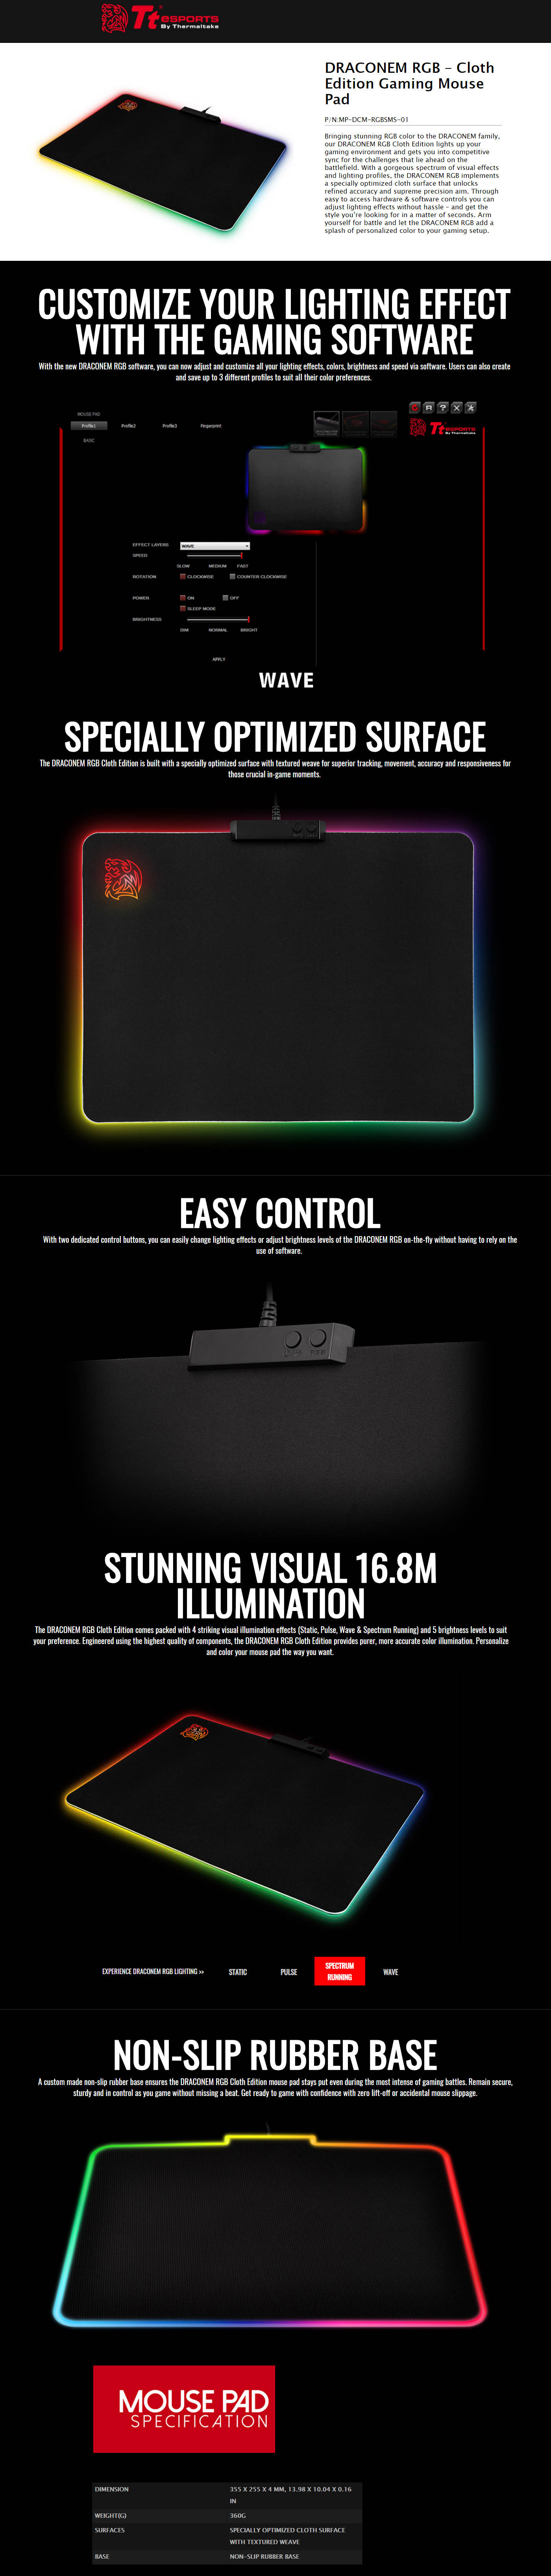  Buy Online Thermaltake Draconem RGB - Cloth Edition Gaming Mouse Pad (MP-DCM-RGBSMS-01)